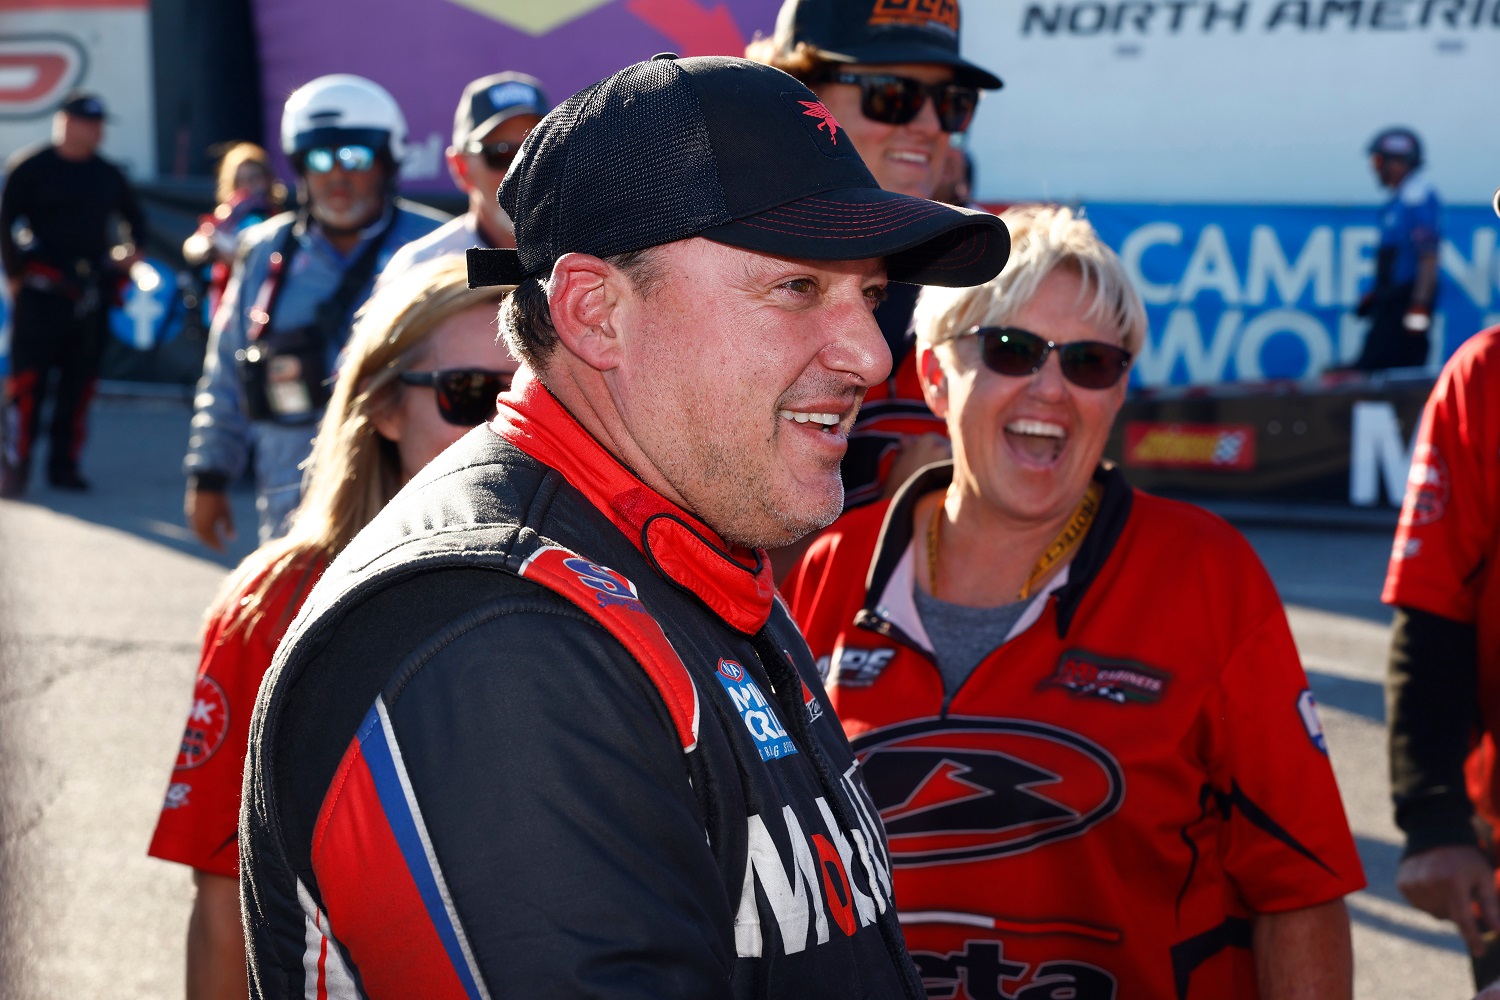 Tony Stewart smiles after losing in the finals at the NHRA Nevada Nationals on Oct. 30, 2022, at The Strip at Las Vegas Motor Speedway. | Jeff Speer/LVMS/Icon Sportswire via Getty Images